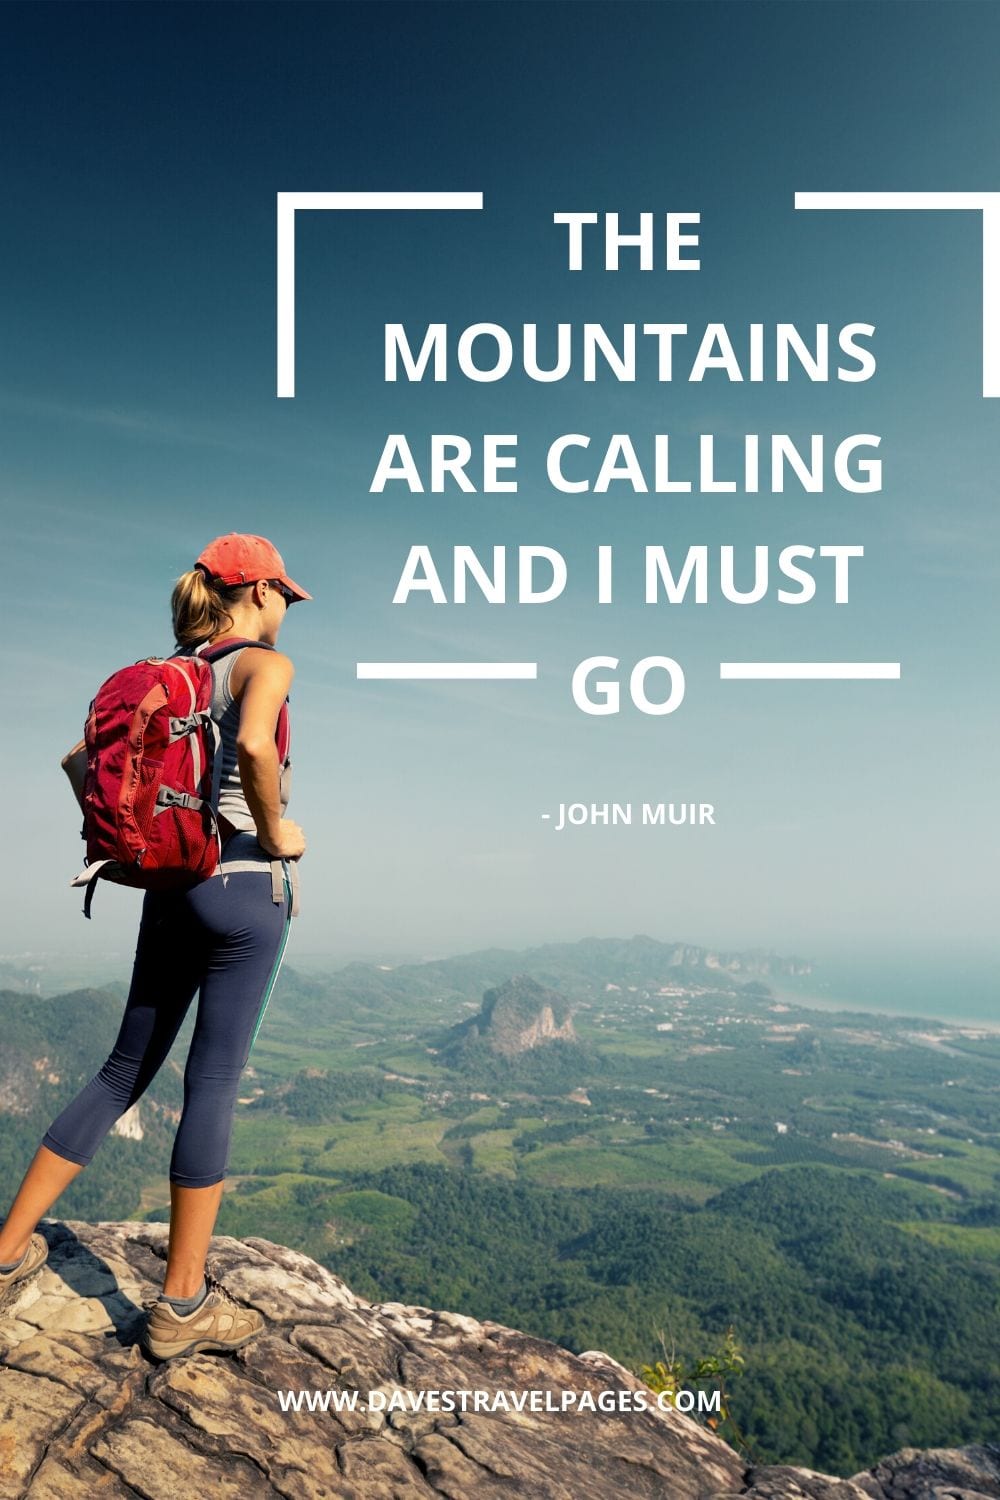 The mountains are calling and I must go - John Muir Quote